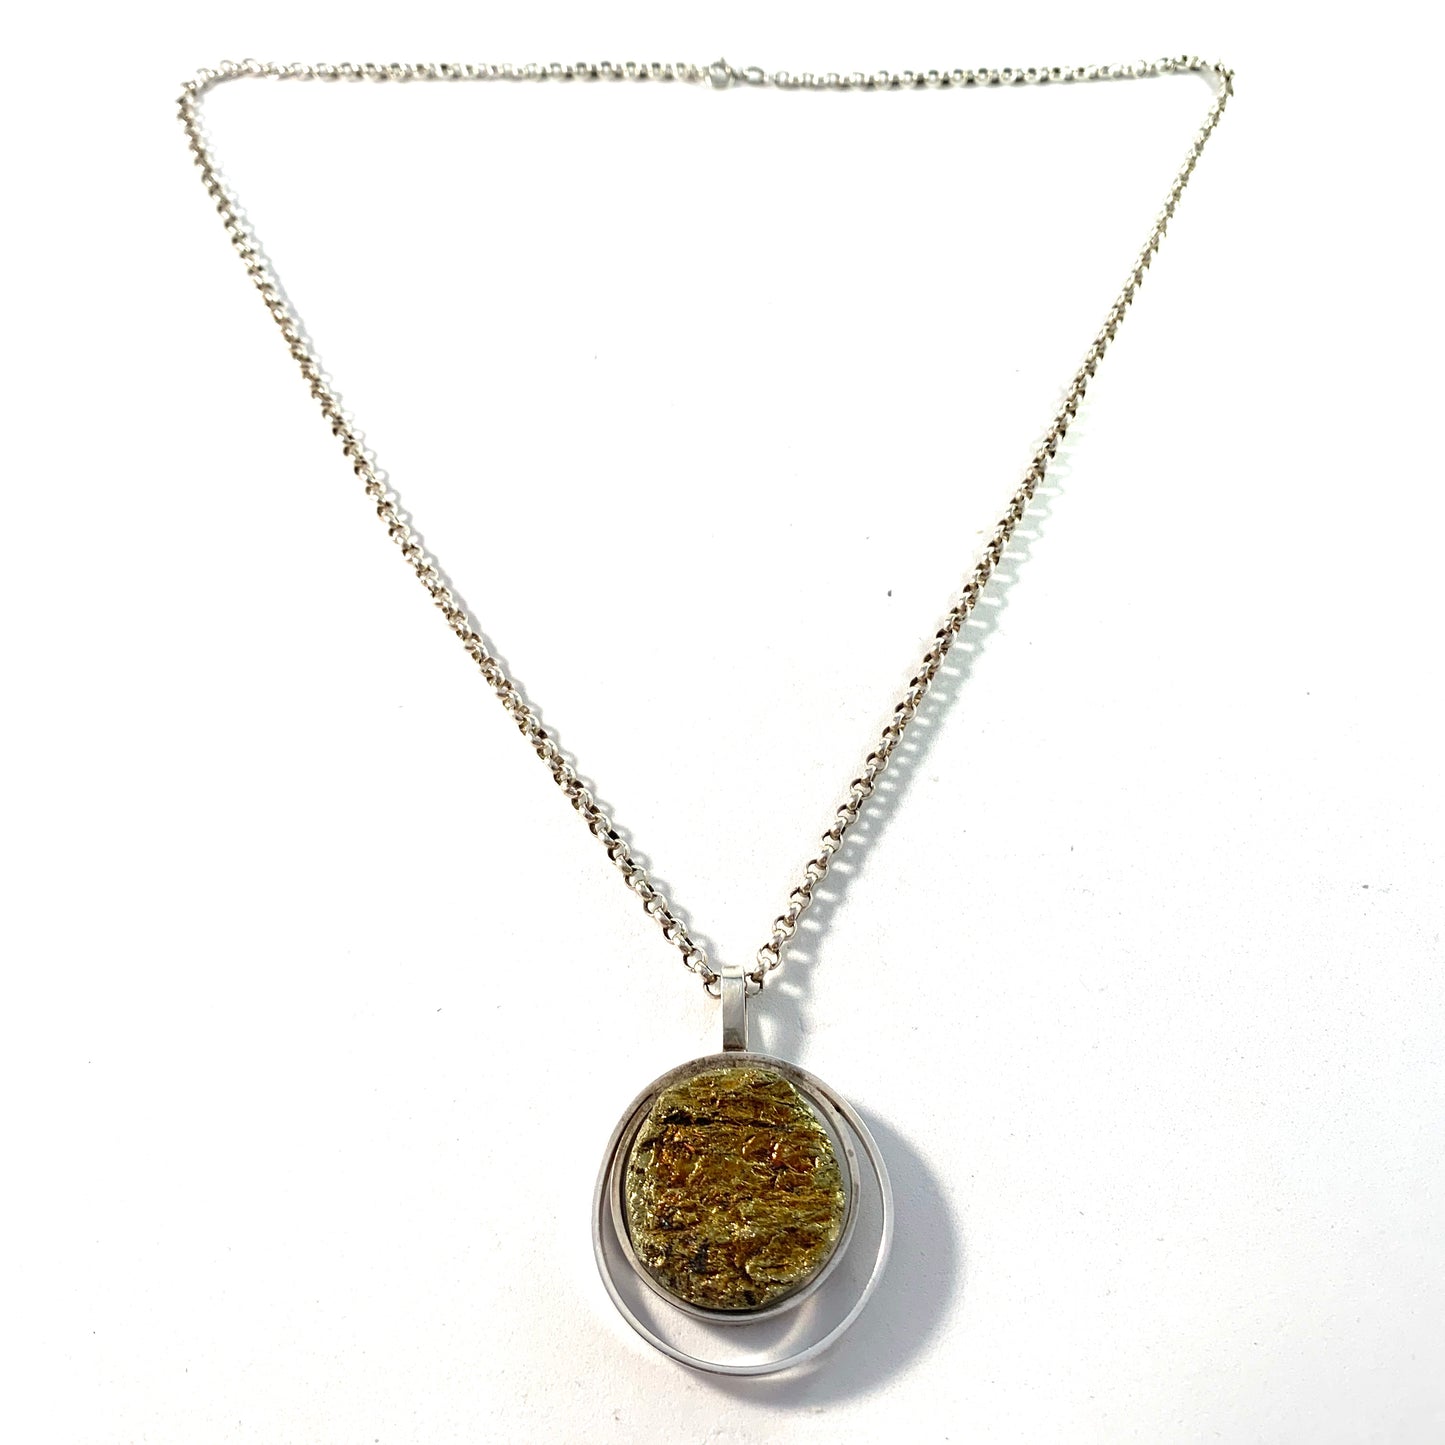 Germany / Austria 1960-70s Solid 835 Silver Mineral Stone Modernist Pendant Necklace.